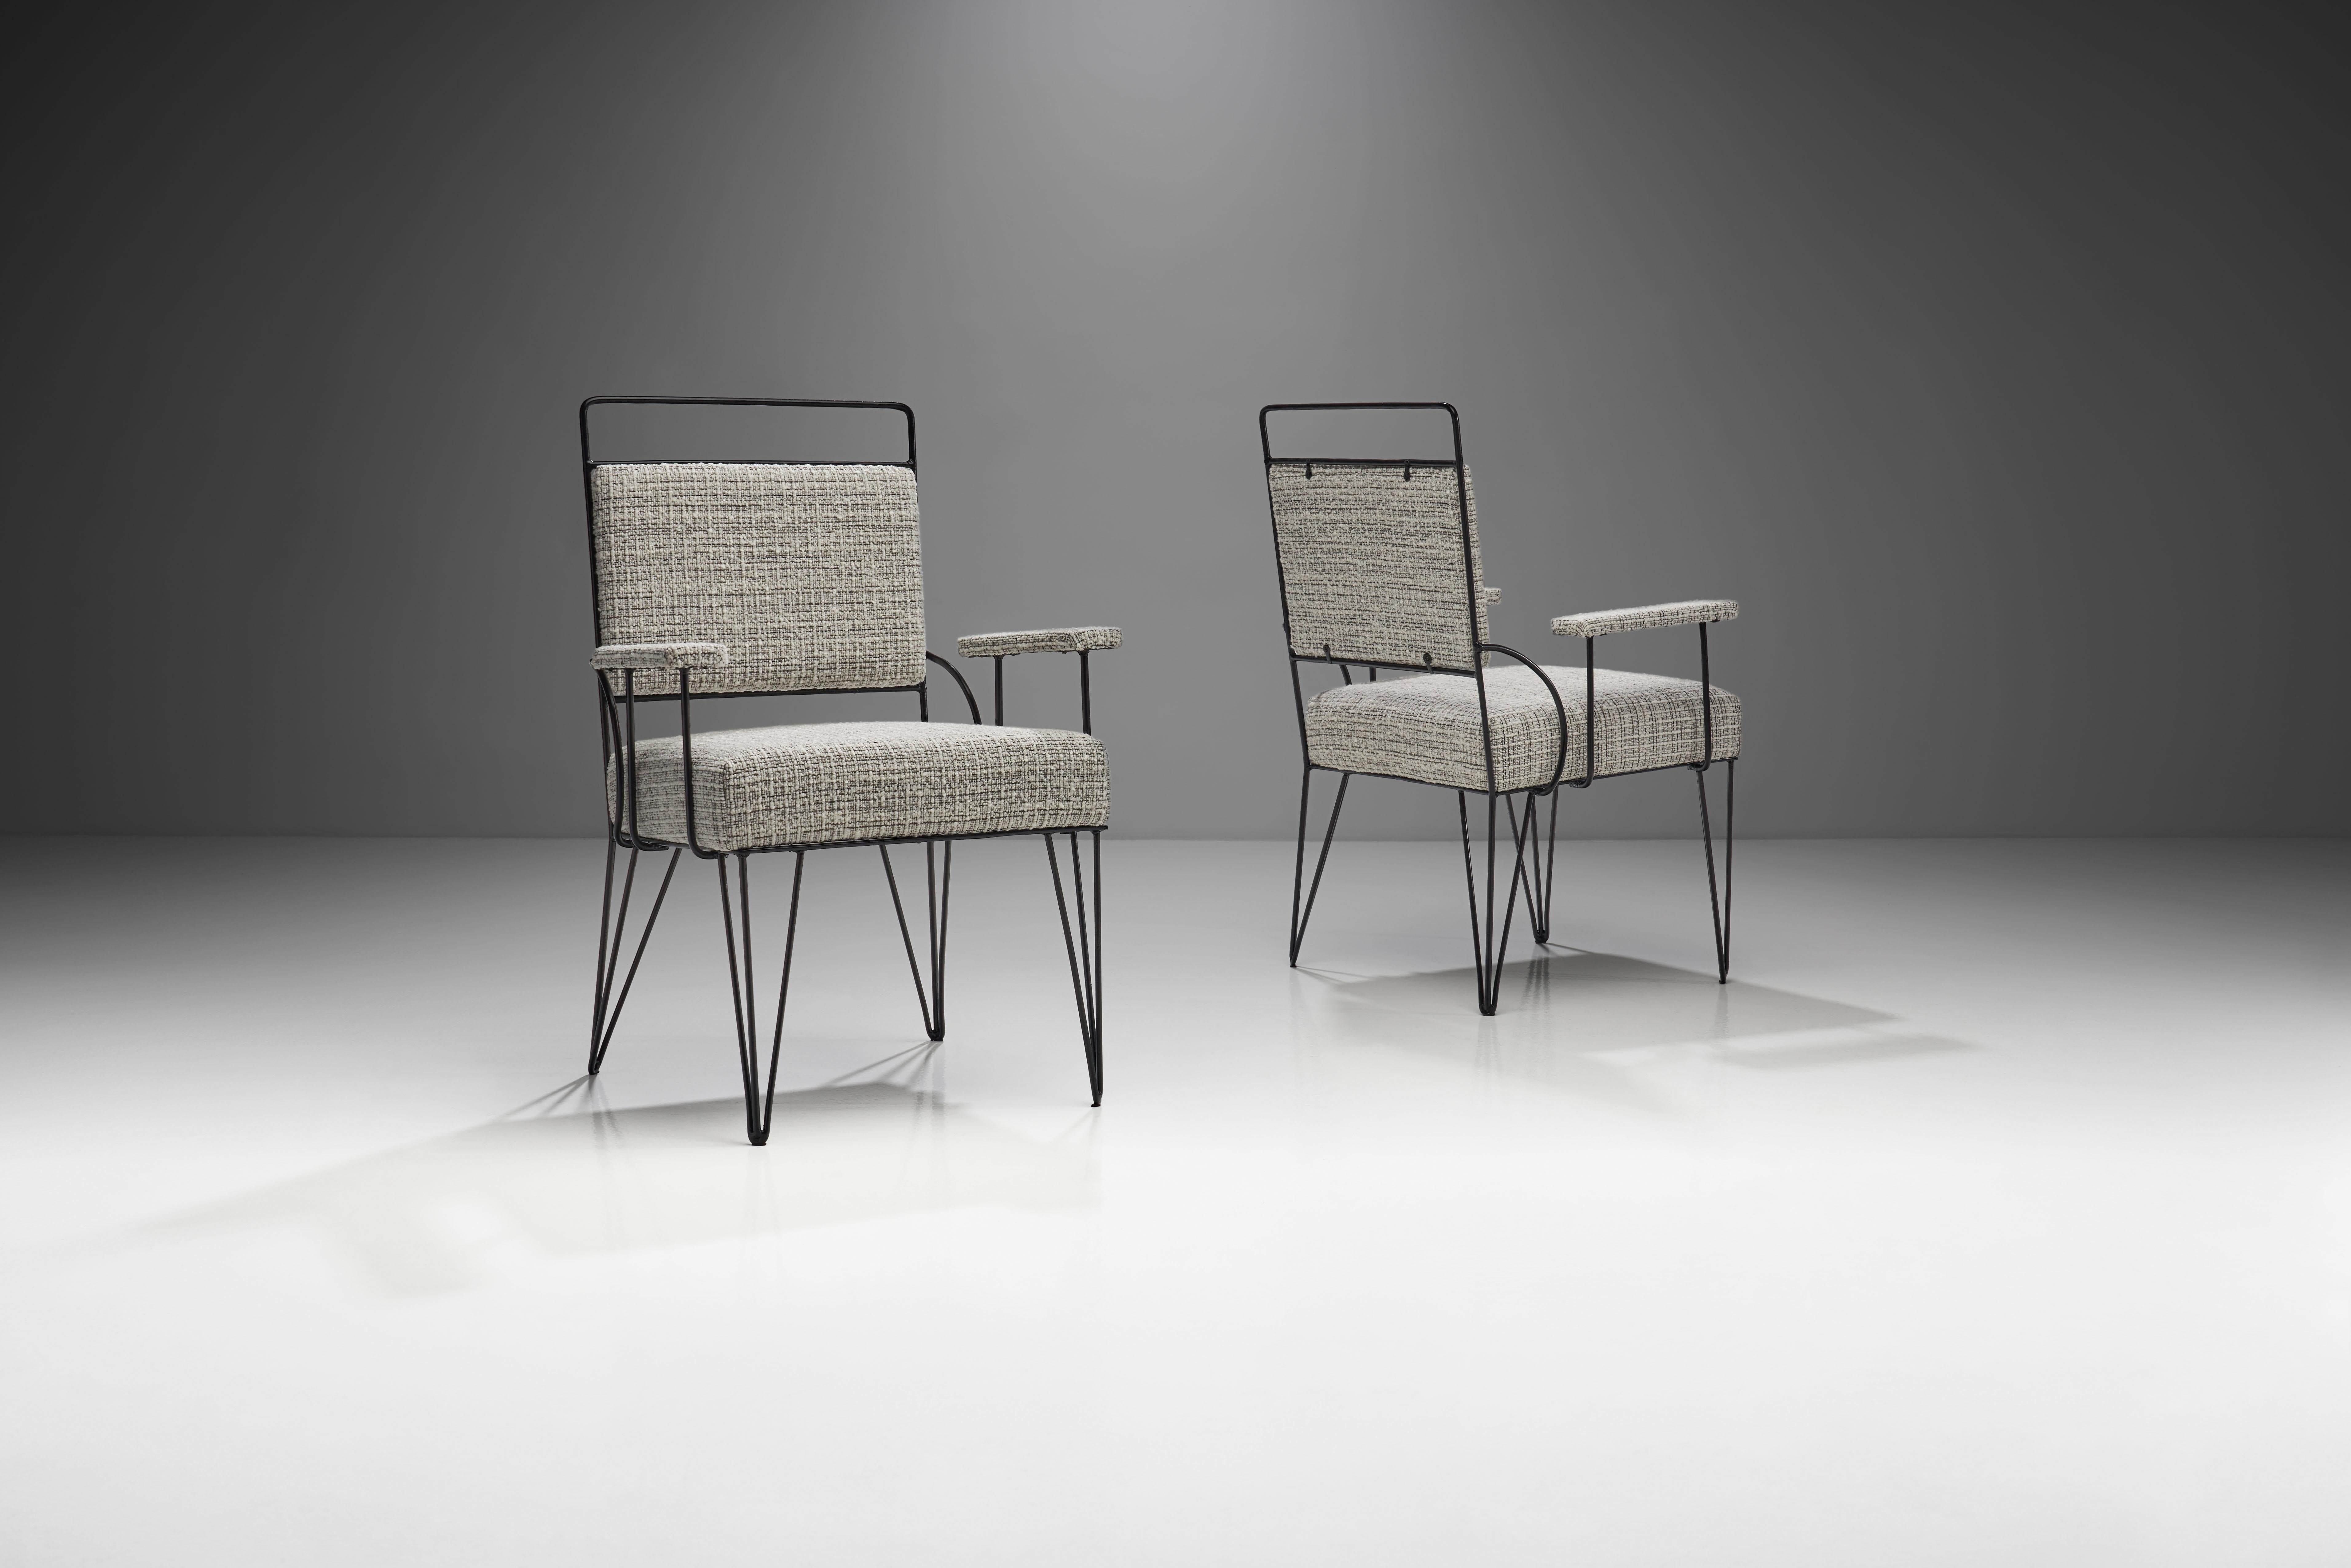 This imposing pair of Brazilian armchairs in iron and fabric is a visually stunning representation of Brazilian Modern design. The well thought out minimalism of these armchairs is honest, elegant and comfortable.

The pair is defined by geometric